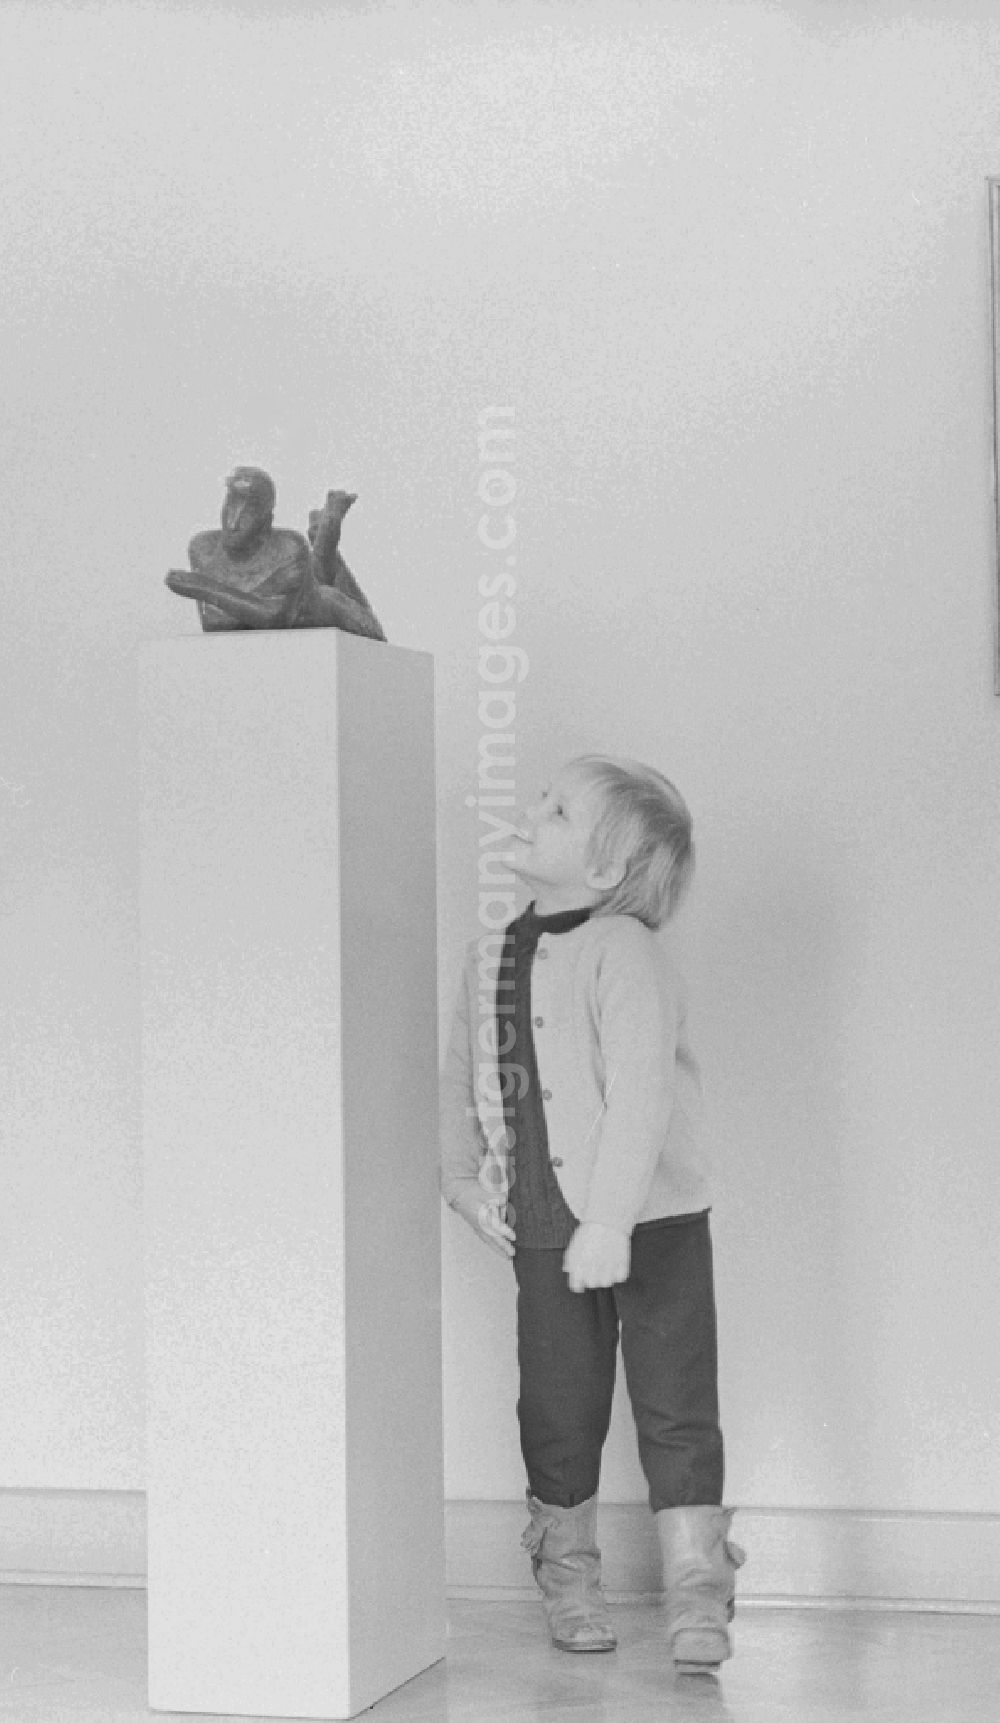 GDR image archive: Berlin - One child look at an exhibit in the Altes Museum in Berlin, the former capital of the GDR, the German Democratic Republic